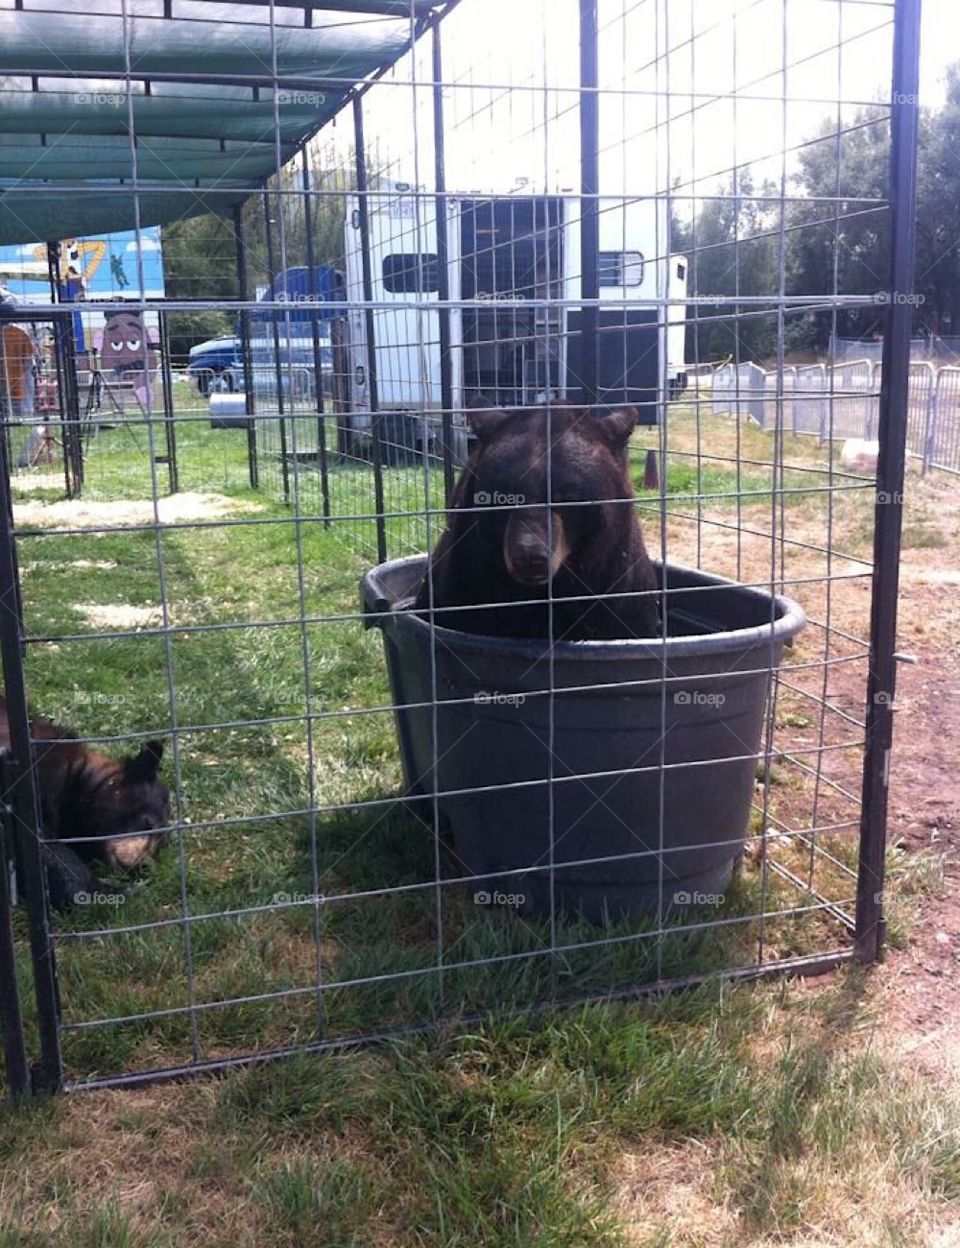 Silly bear! Sitting in his water bucket at the Davis County fair, Utah